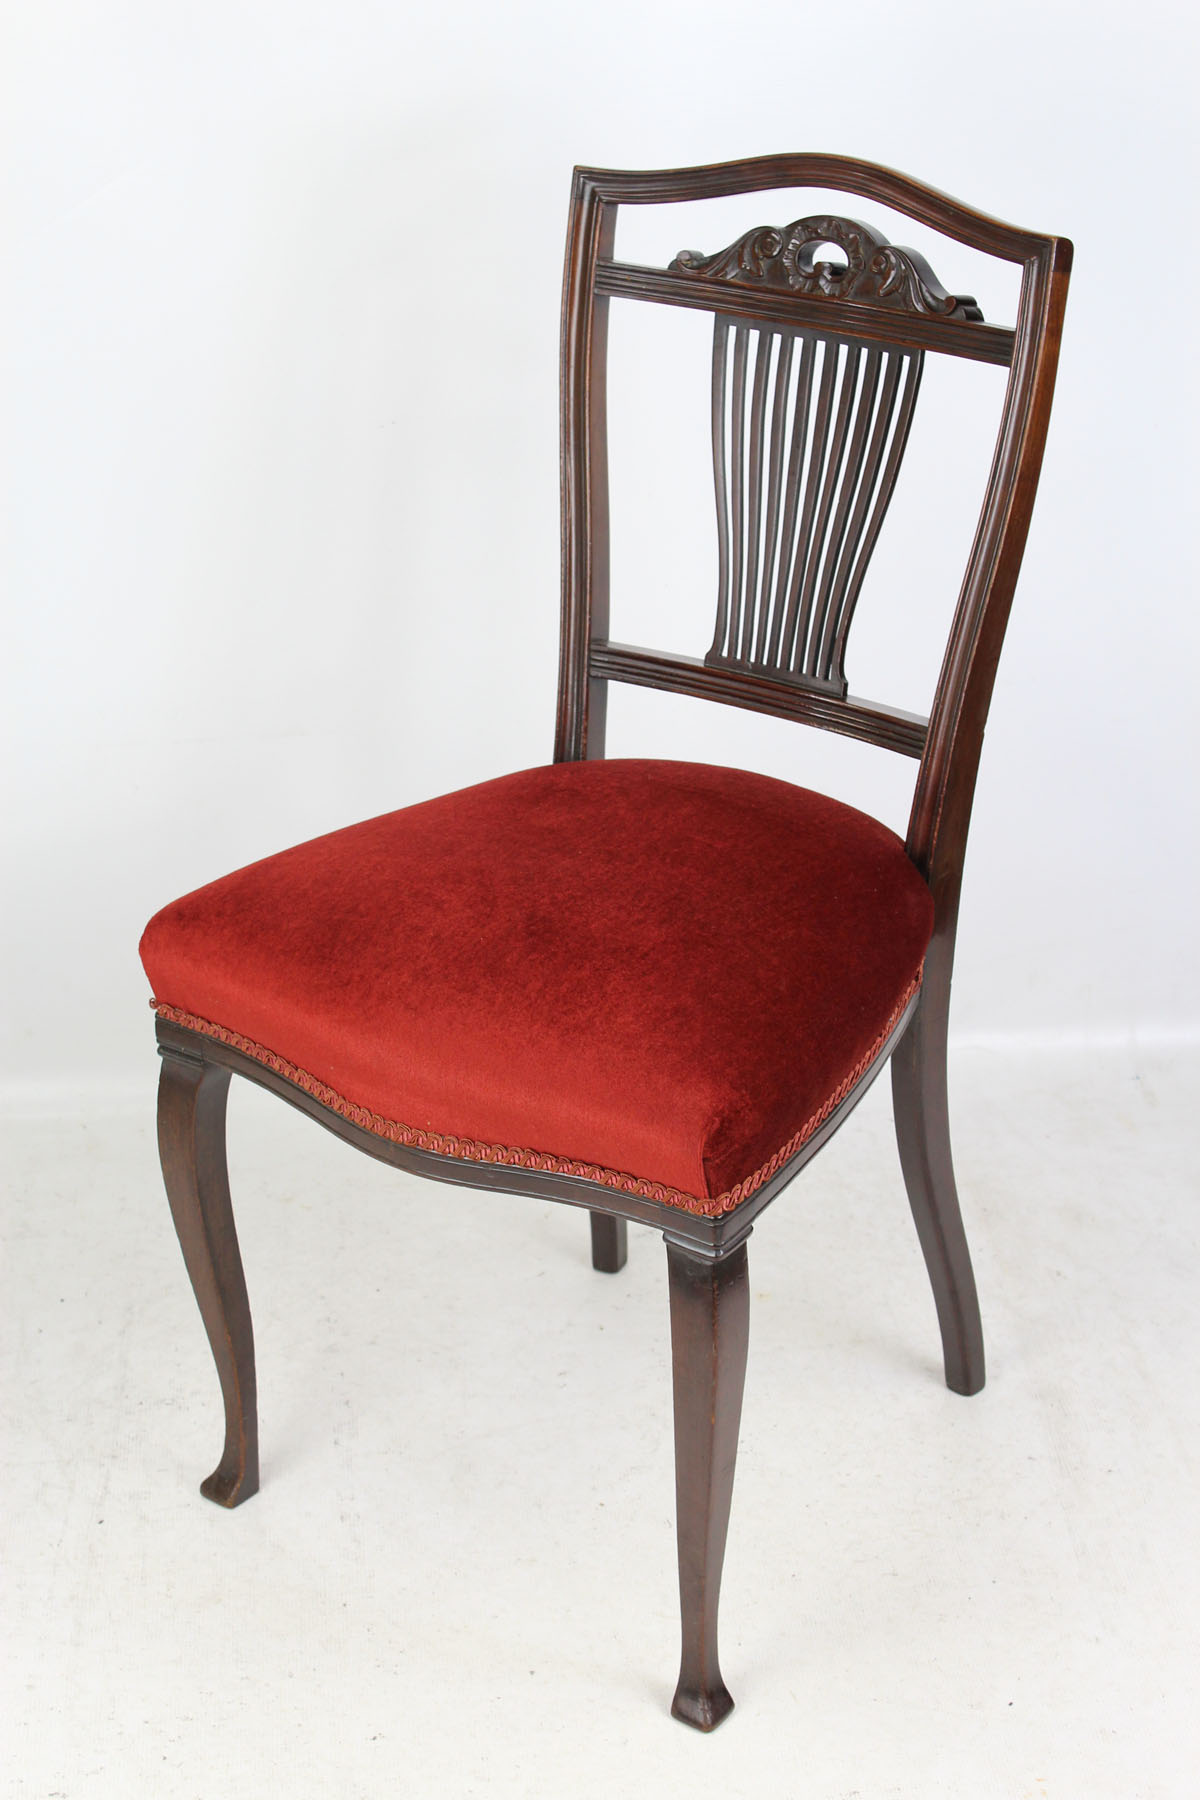 Antique Edwardian Mahogany Dressing Table Chair